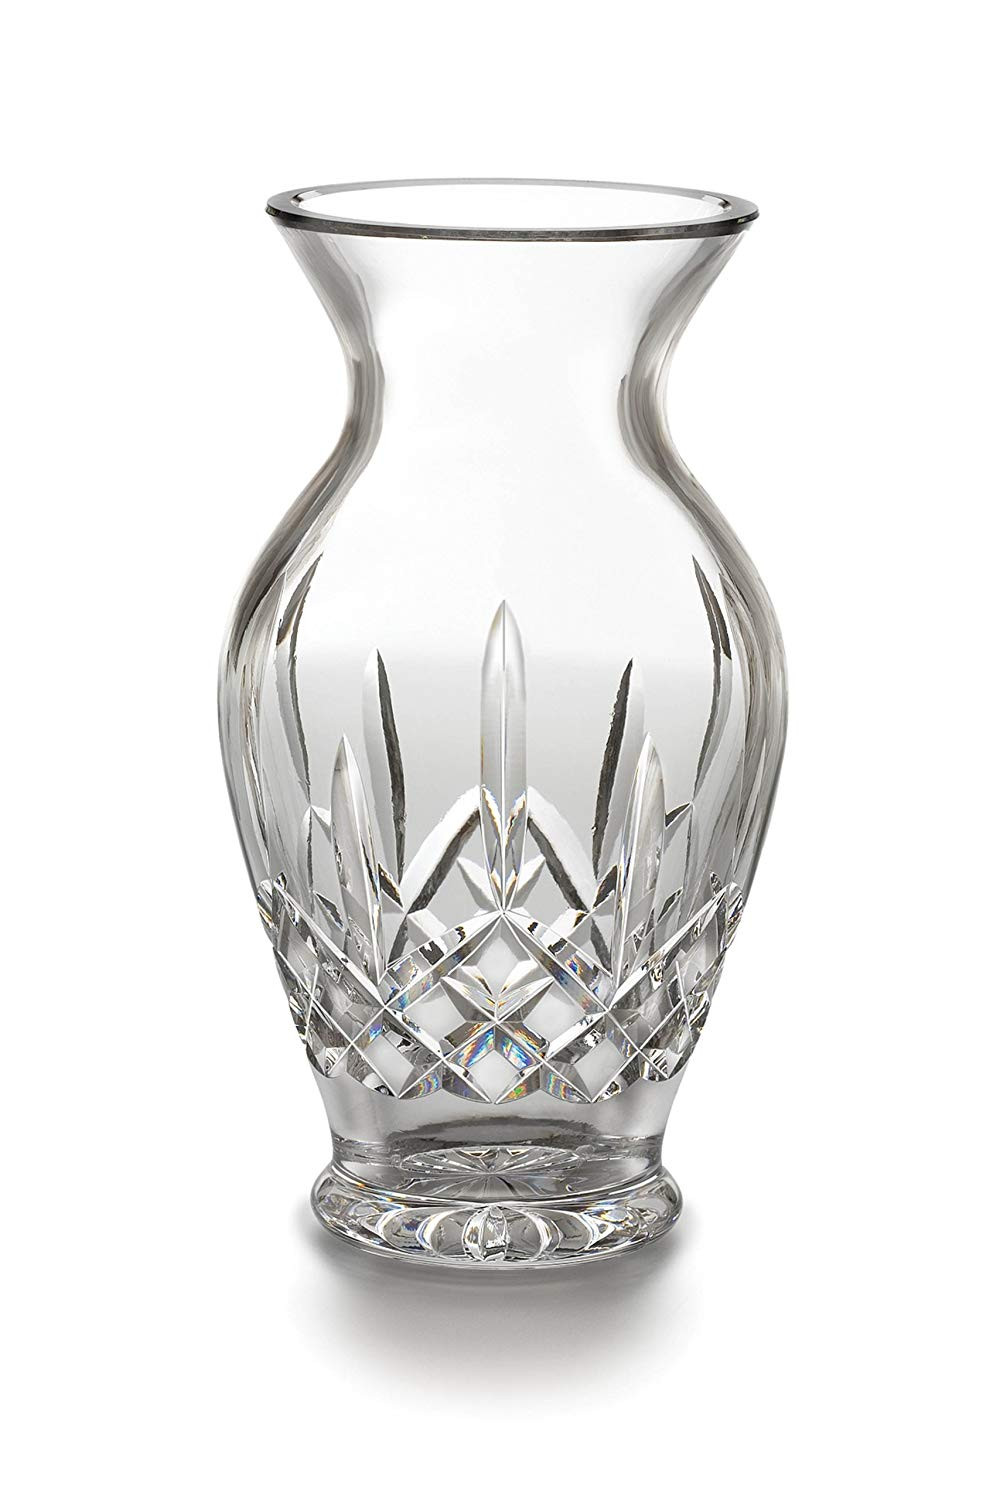 24 Perfect Waterford Lismore 8 Flared Vase 2024 free download waterford lismore 8 flared vase of amazon com waterford lismore 10 vase home kitchen pertaining to 81d jgb61dl sl1500